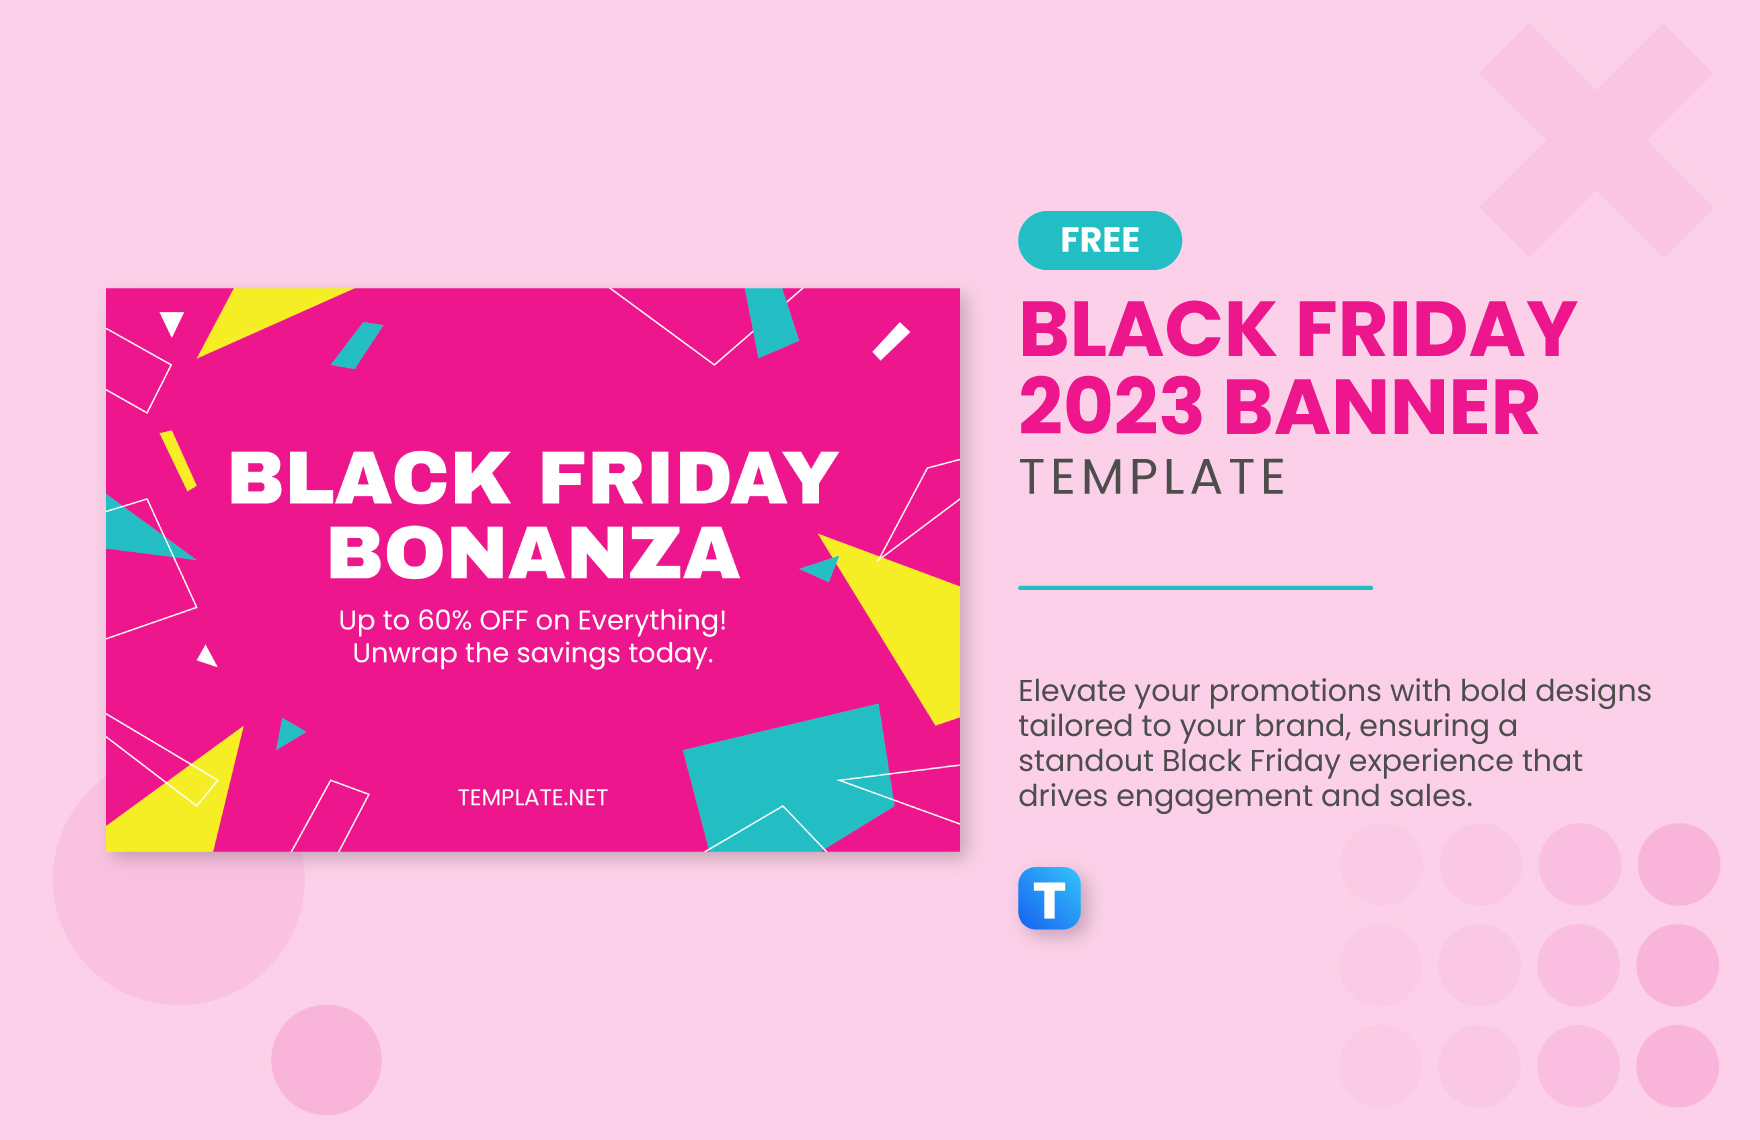 Black Friday 2023 Banner Template